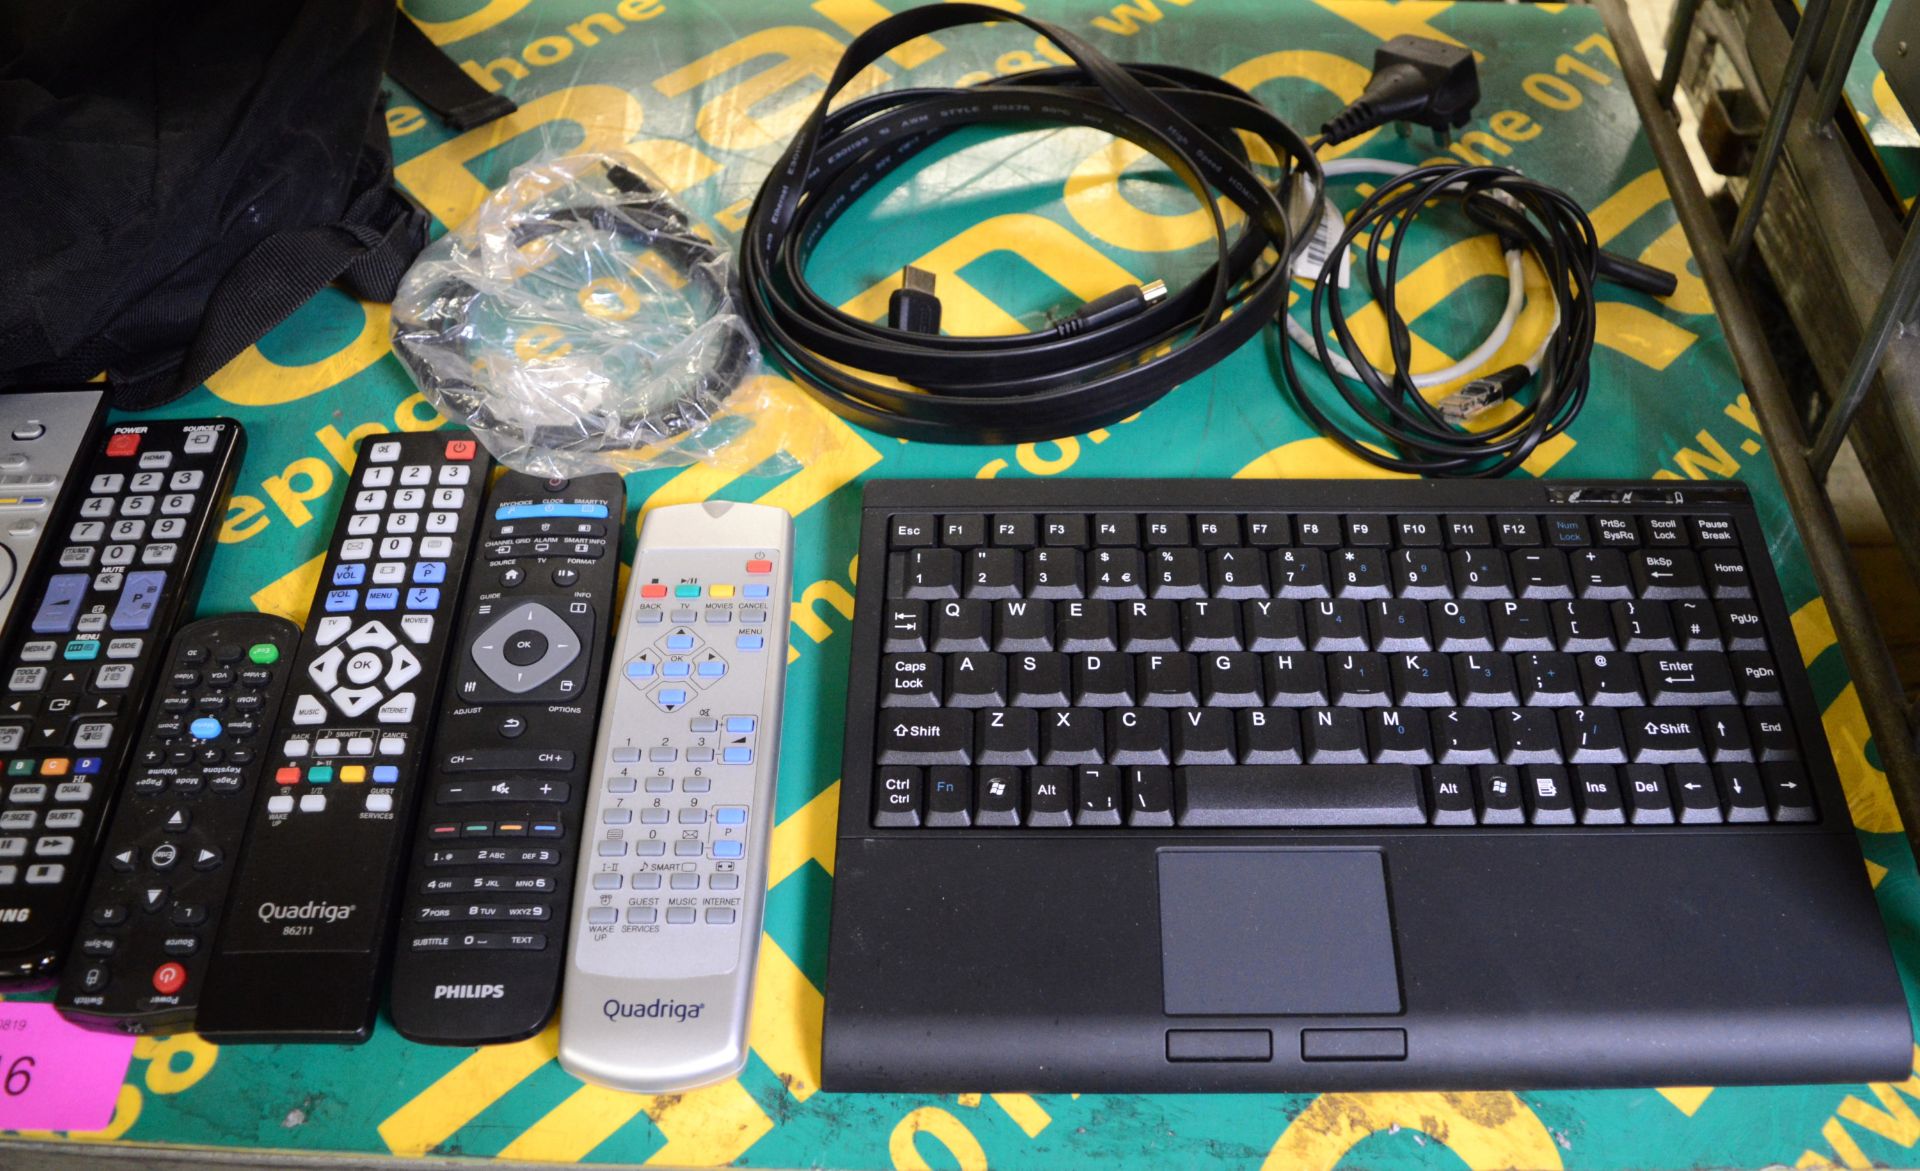 Sanyo Pro-X PLC-SW-30 LCD Projector, Remotes, Cables, Keyboard with carry bag - Image 3 of 3